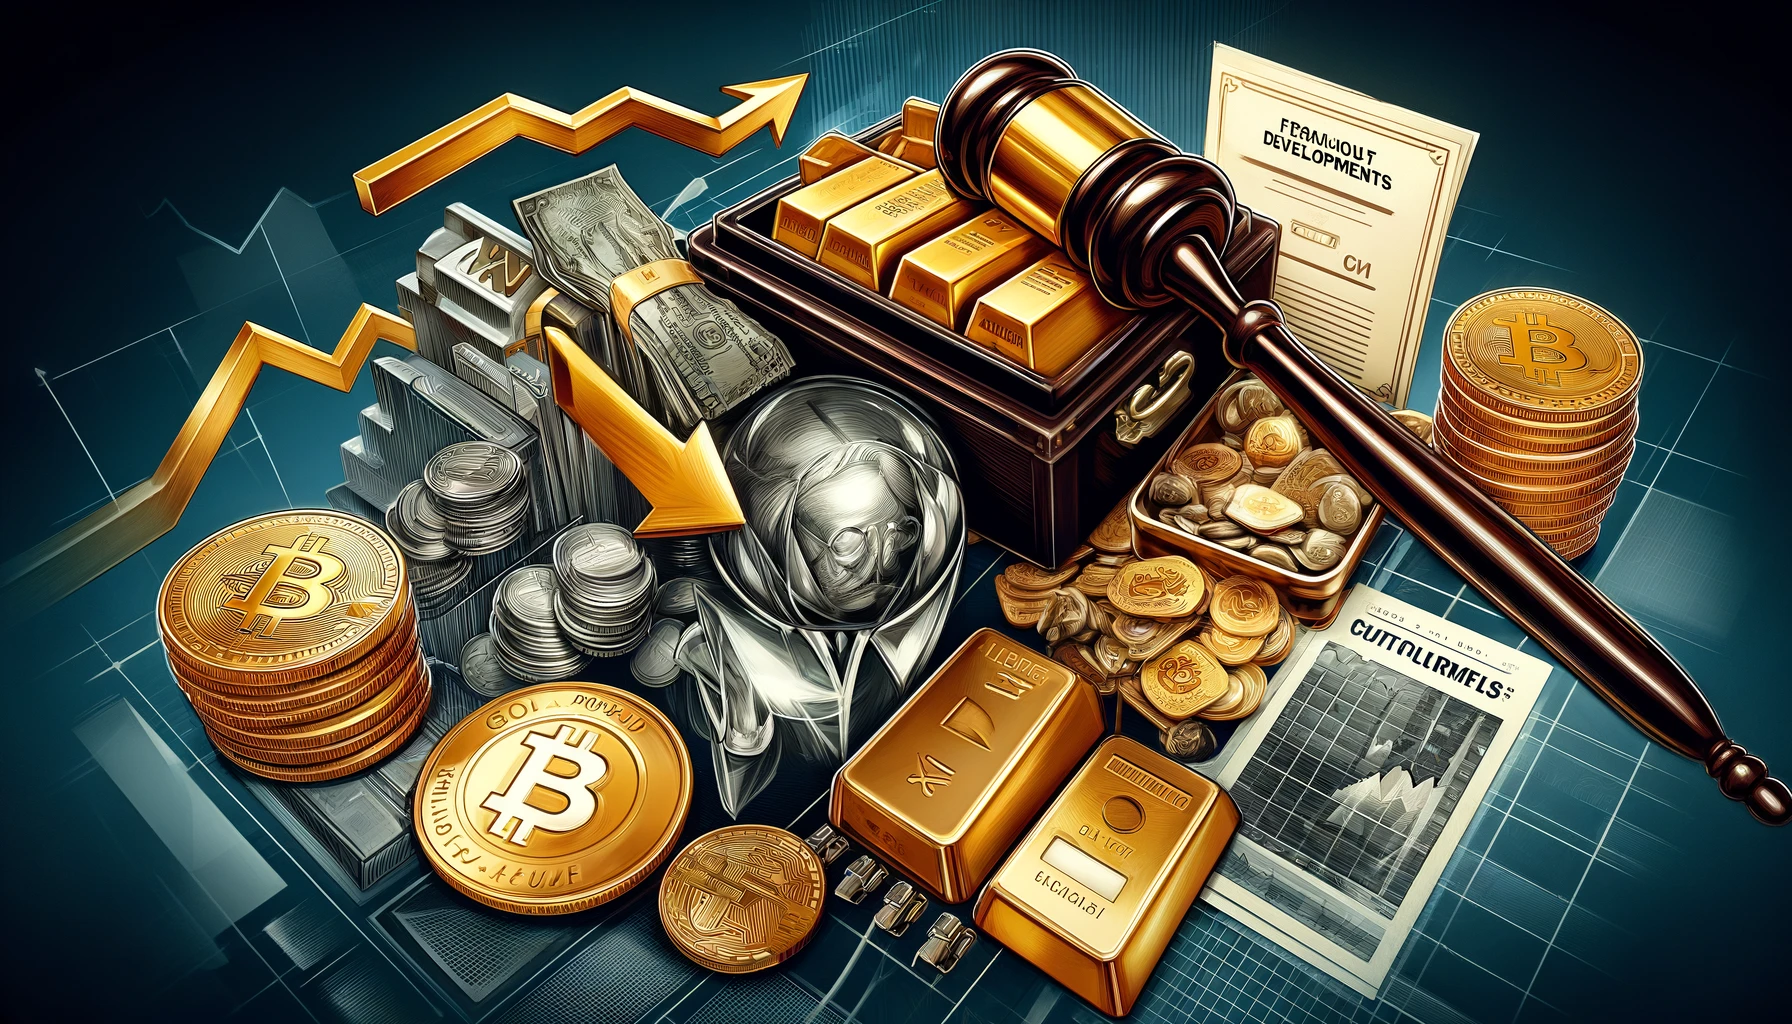 precious metals, legal developments, the cryptocurrency market